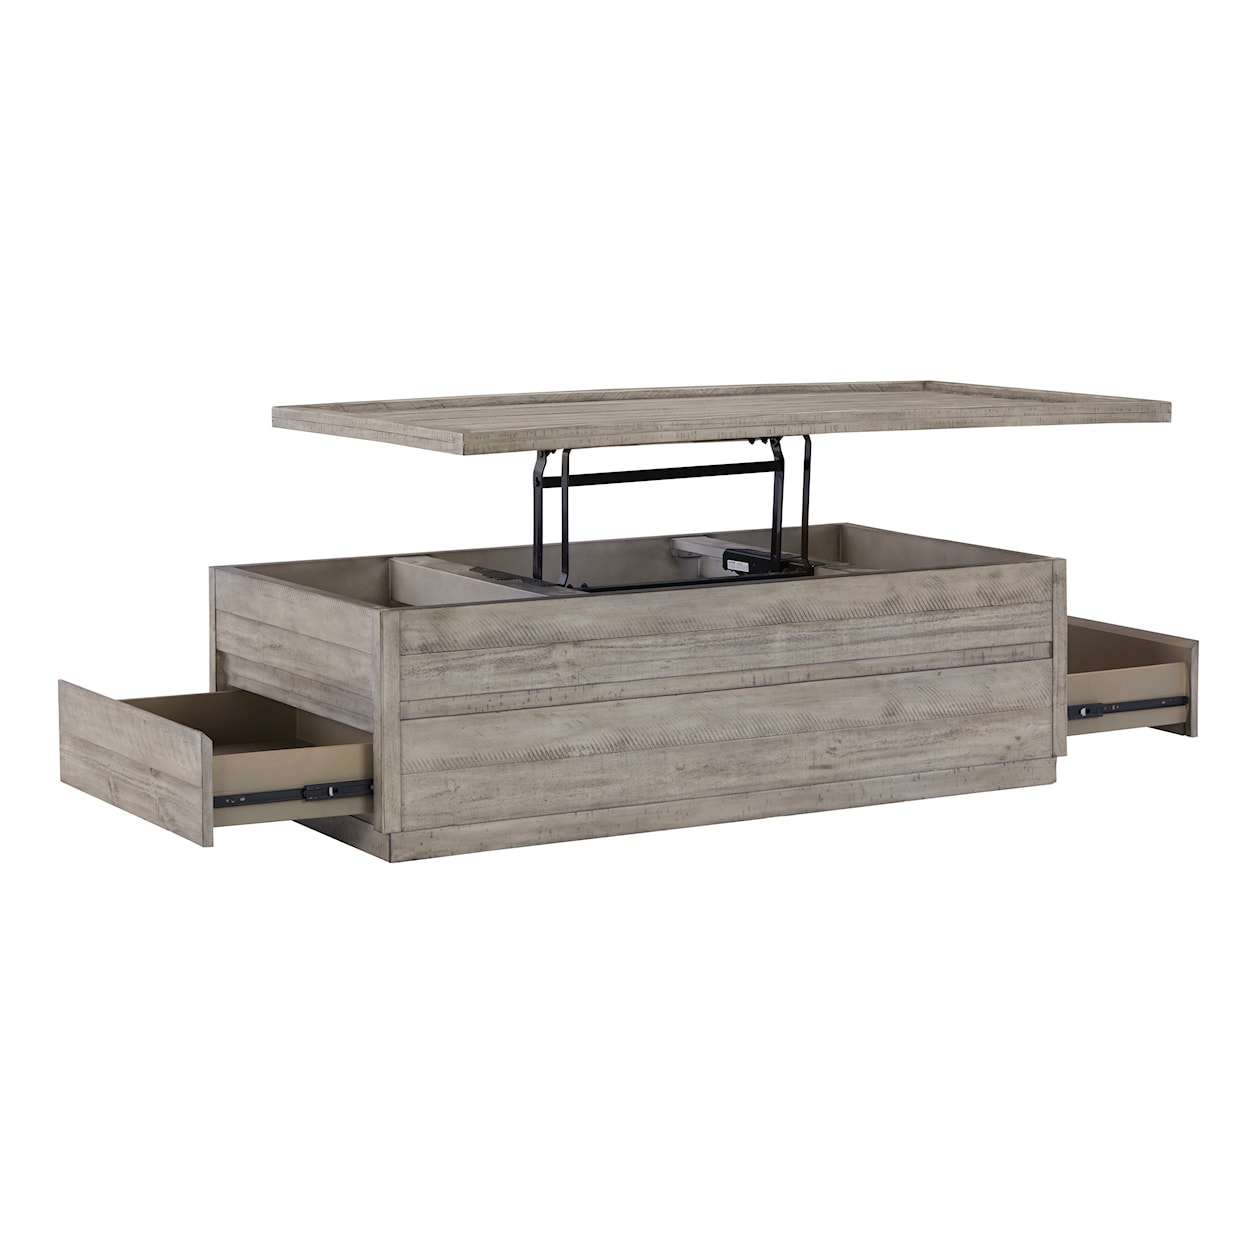 Benchcraft Naydell Lift Top Coffee Table